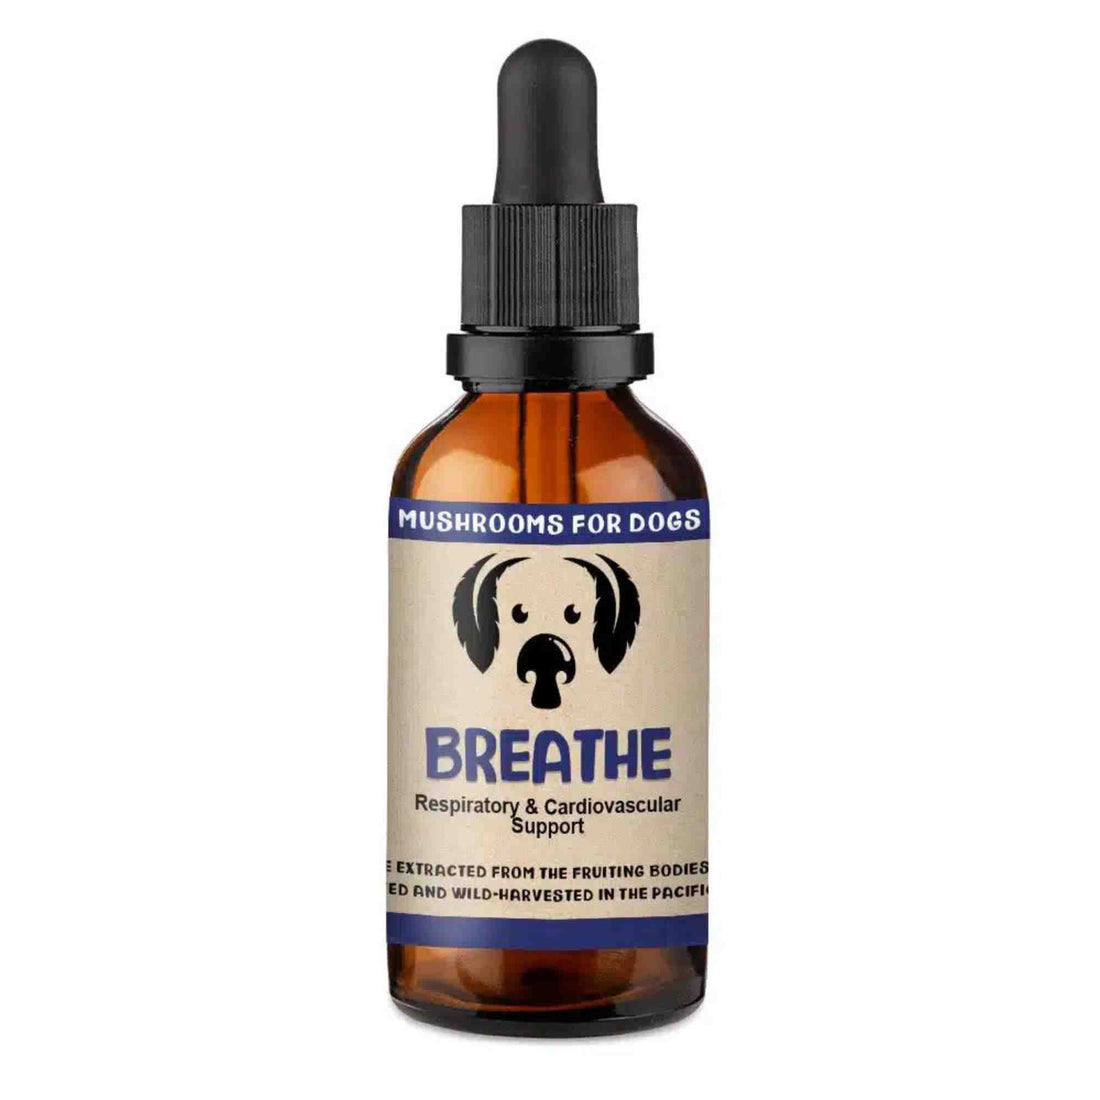 Breathe Mushrooms by mycodog for respiratory and cardiovascular health for dogs